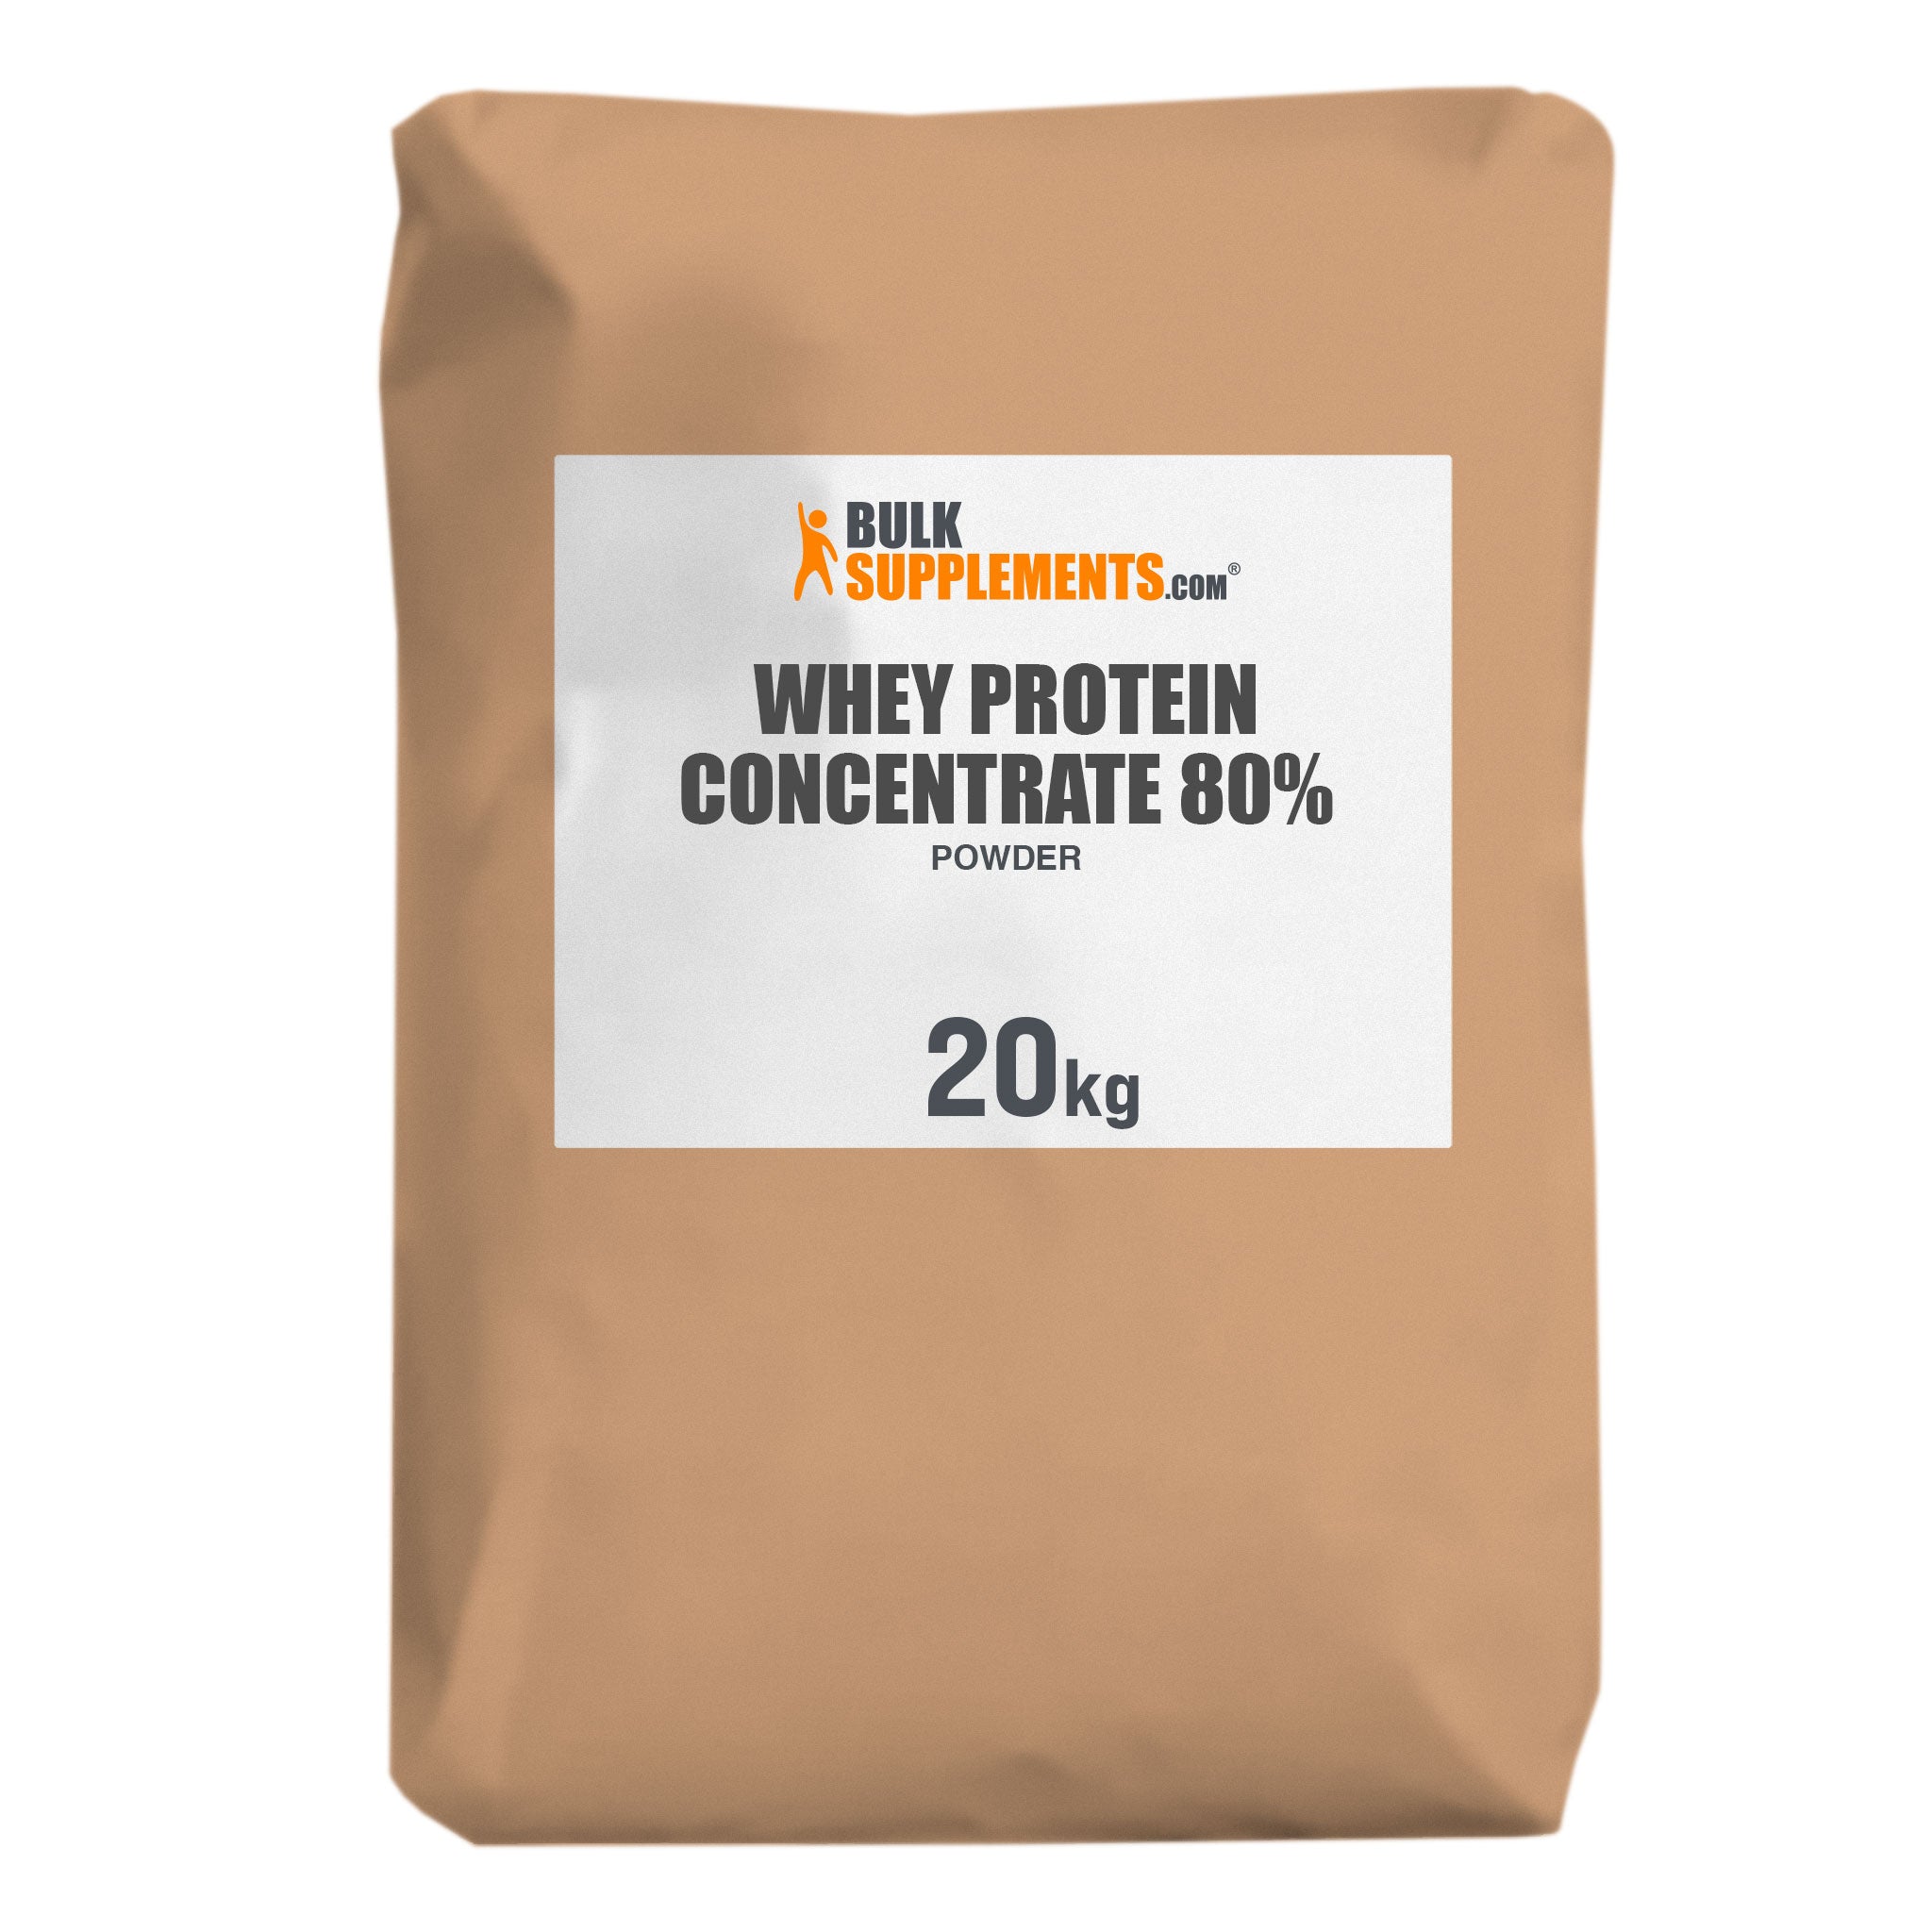 BulkSupplements Whey Protein Concentrate 80% Powder 20kg bag